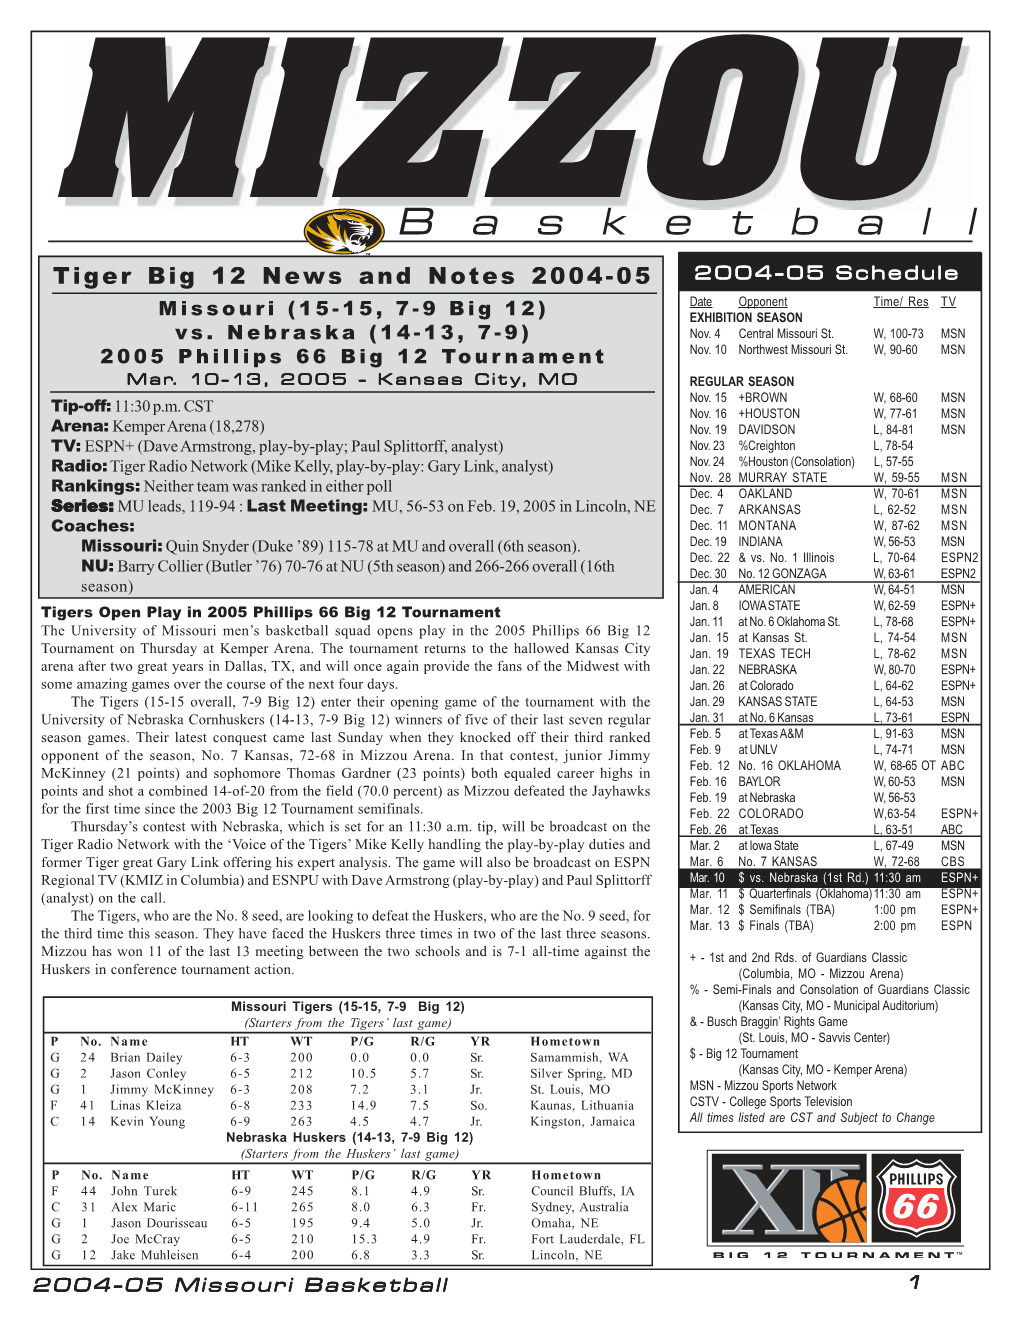 Big 12 News and Notes 2004-05 2004-05 Schedule Date Opponent Time/ Res TV Missouri (15-15, 7-9 Big 12) EXHIBITION SEASON Vs